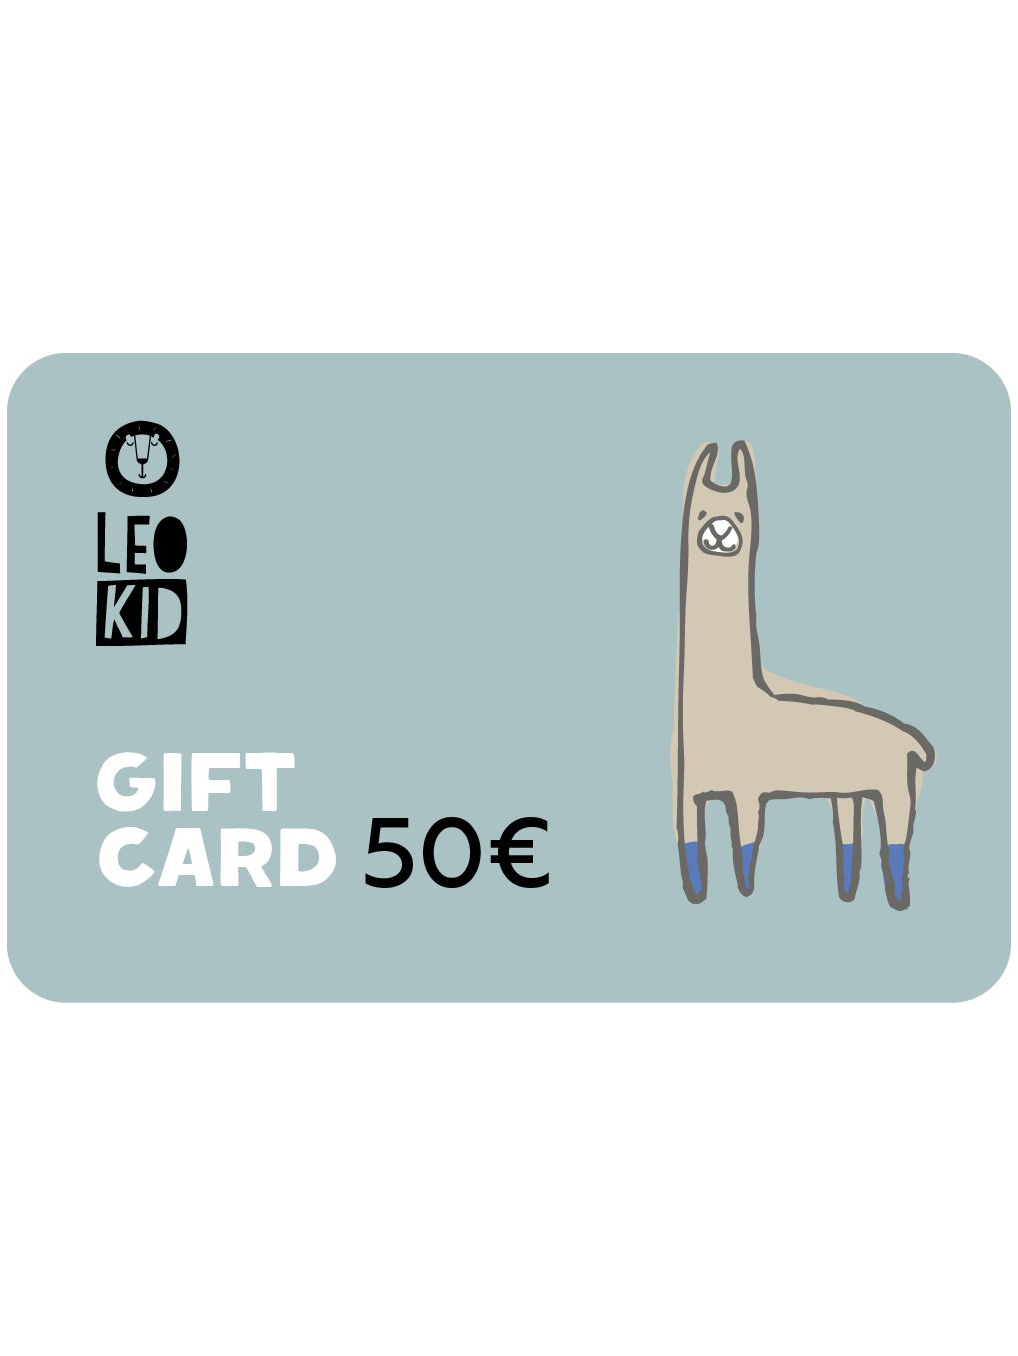 Electronic gift card 50€